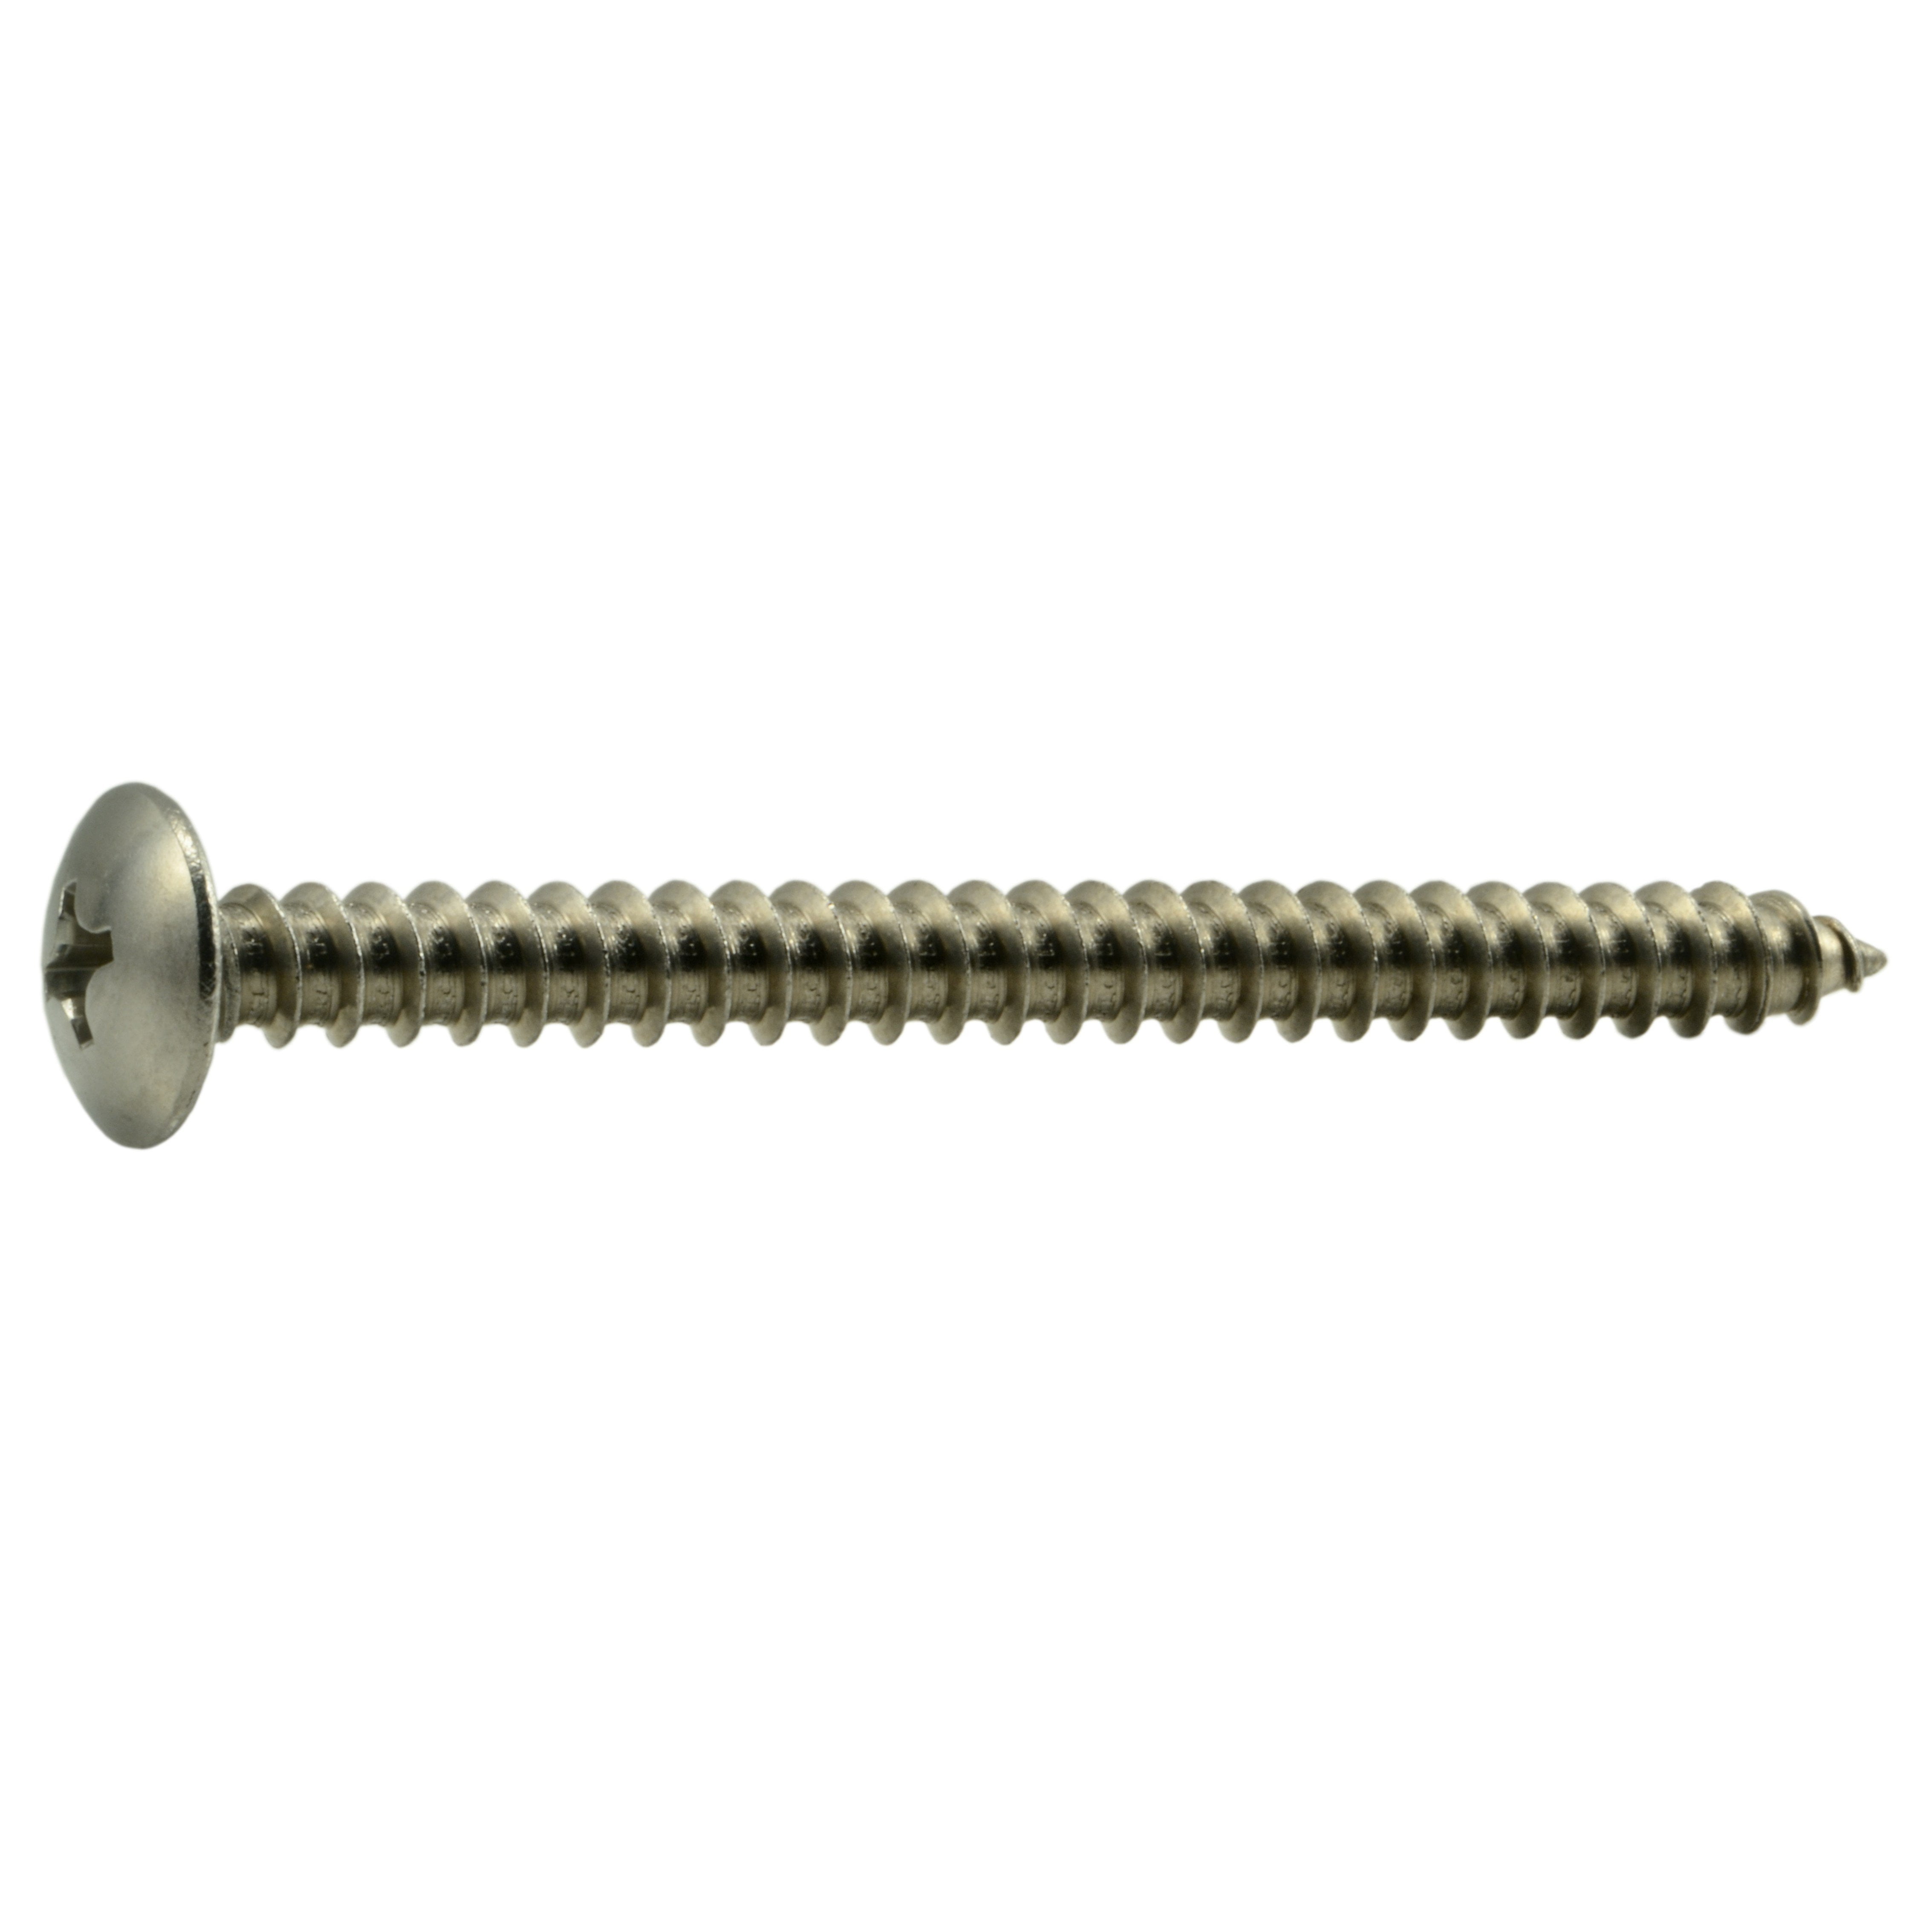 #14 x 3/4" Truss Head Phillips Sheet Metal Screws Self Tapping,18-8 Stainless St 